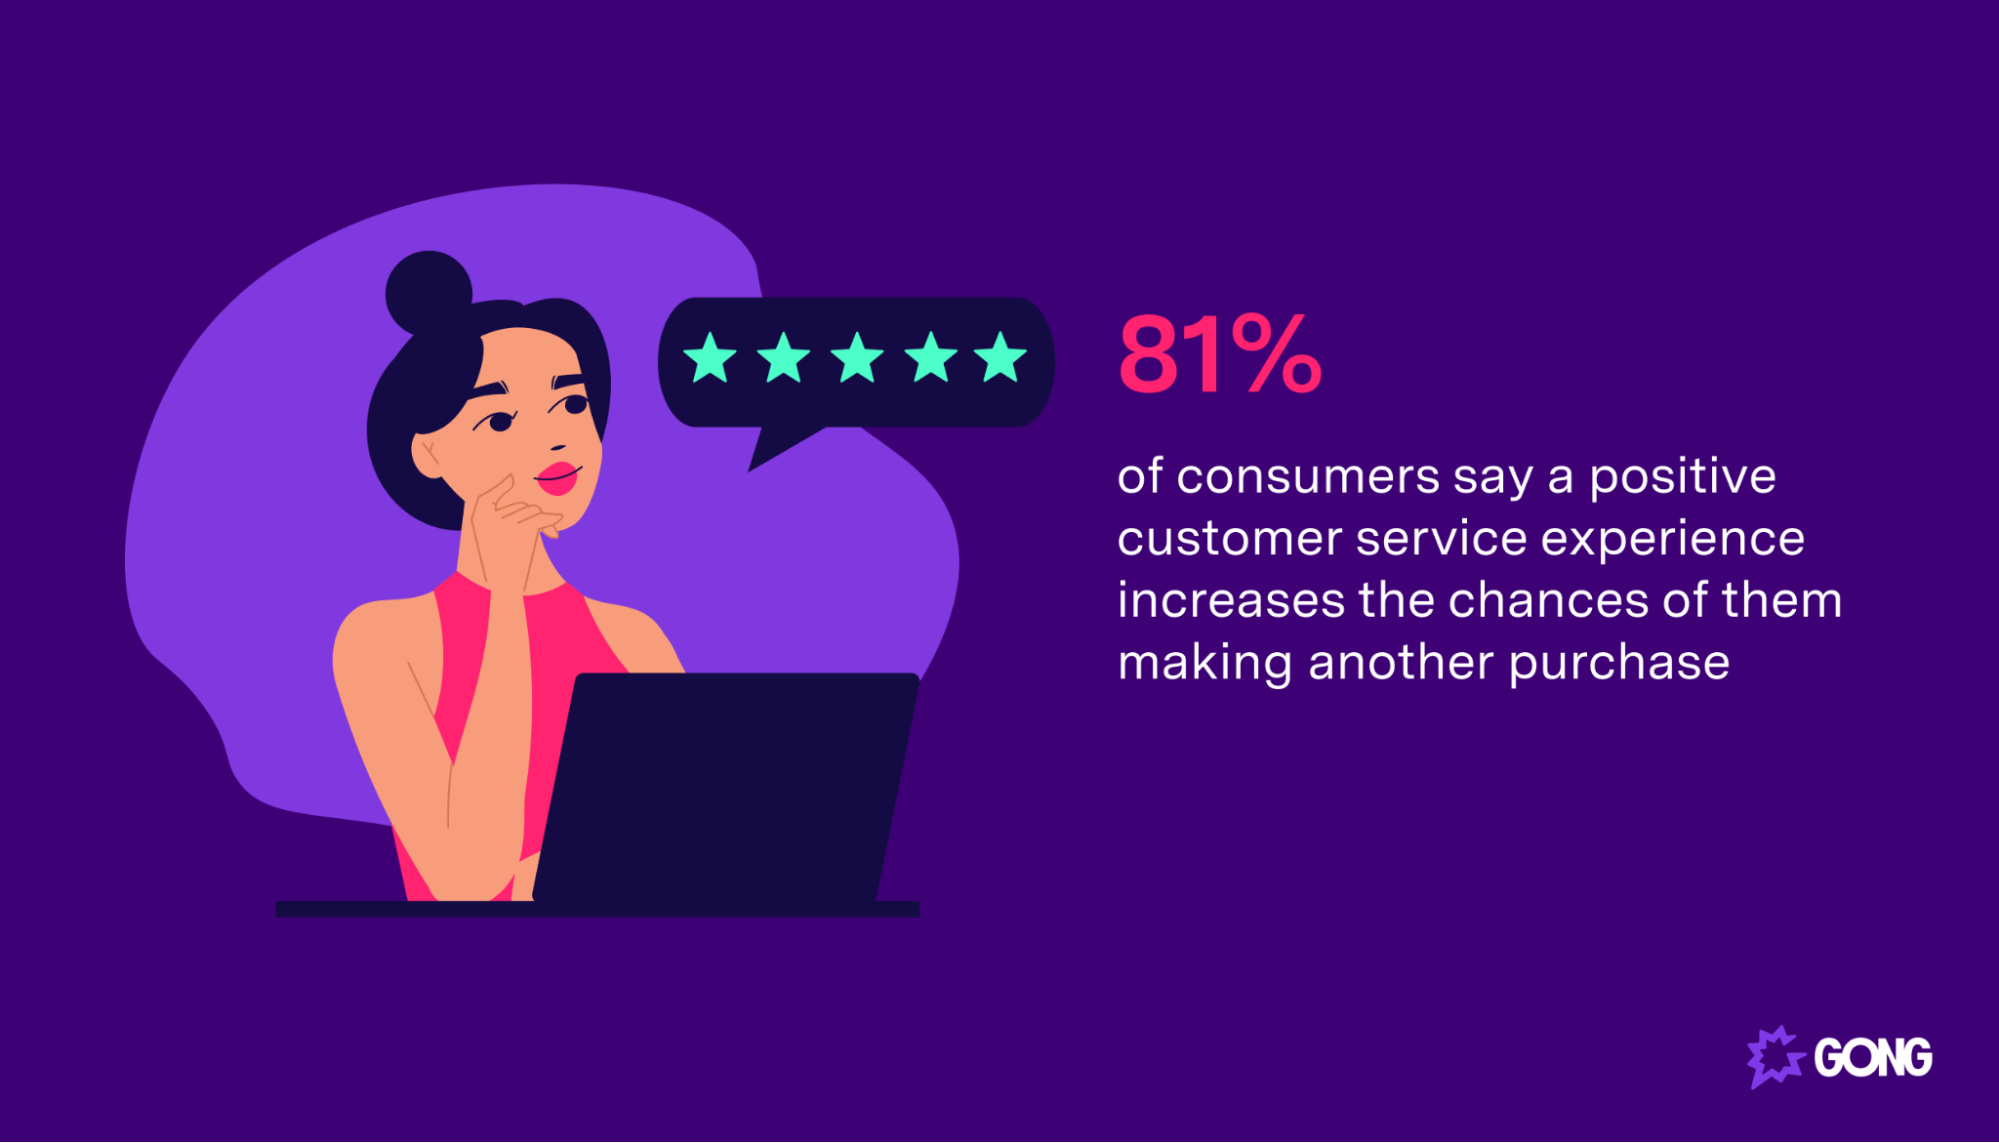 An image showing a customer support statistic